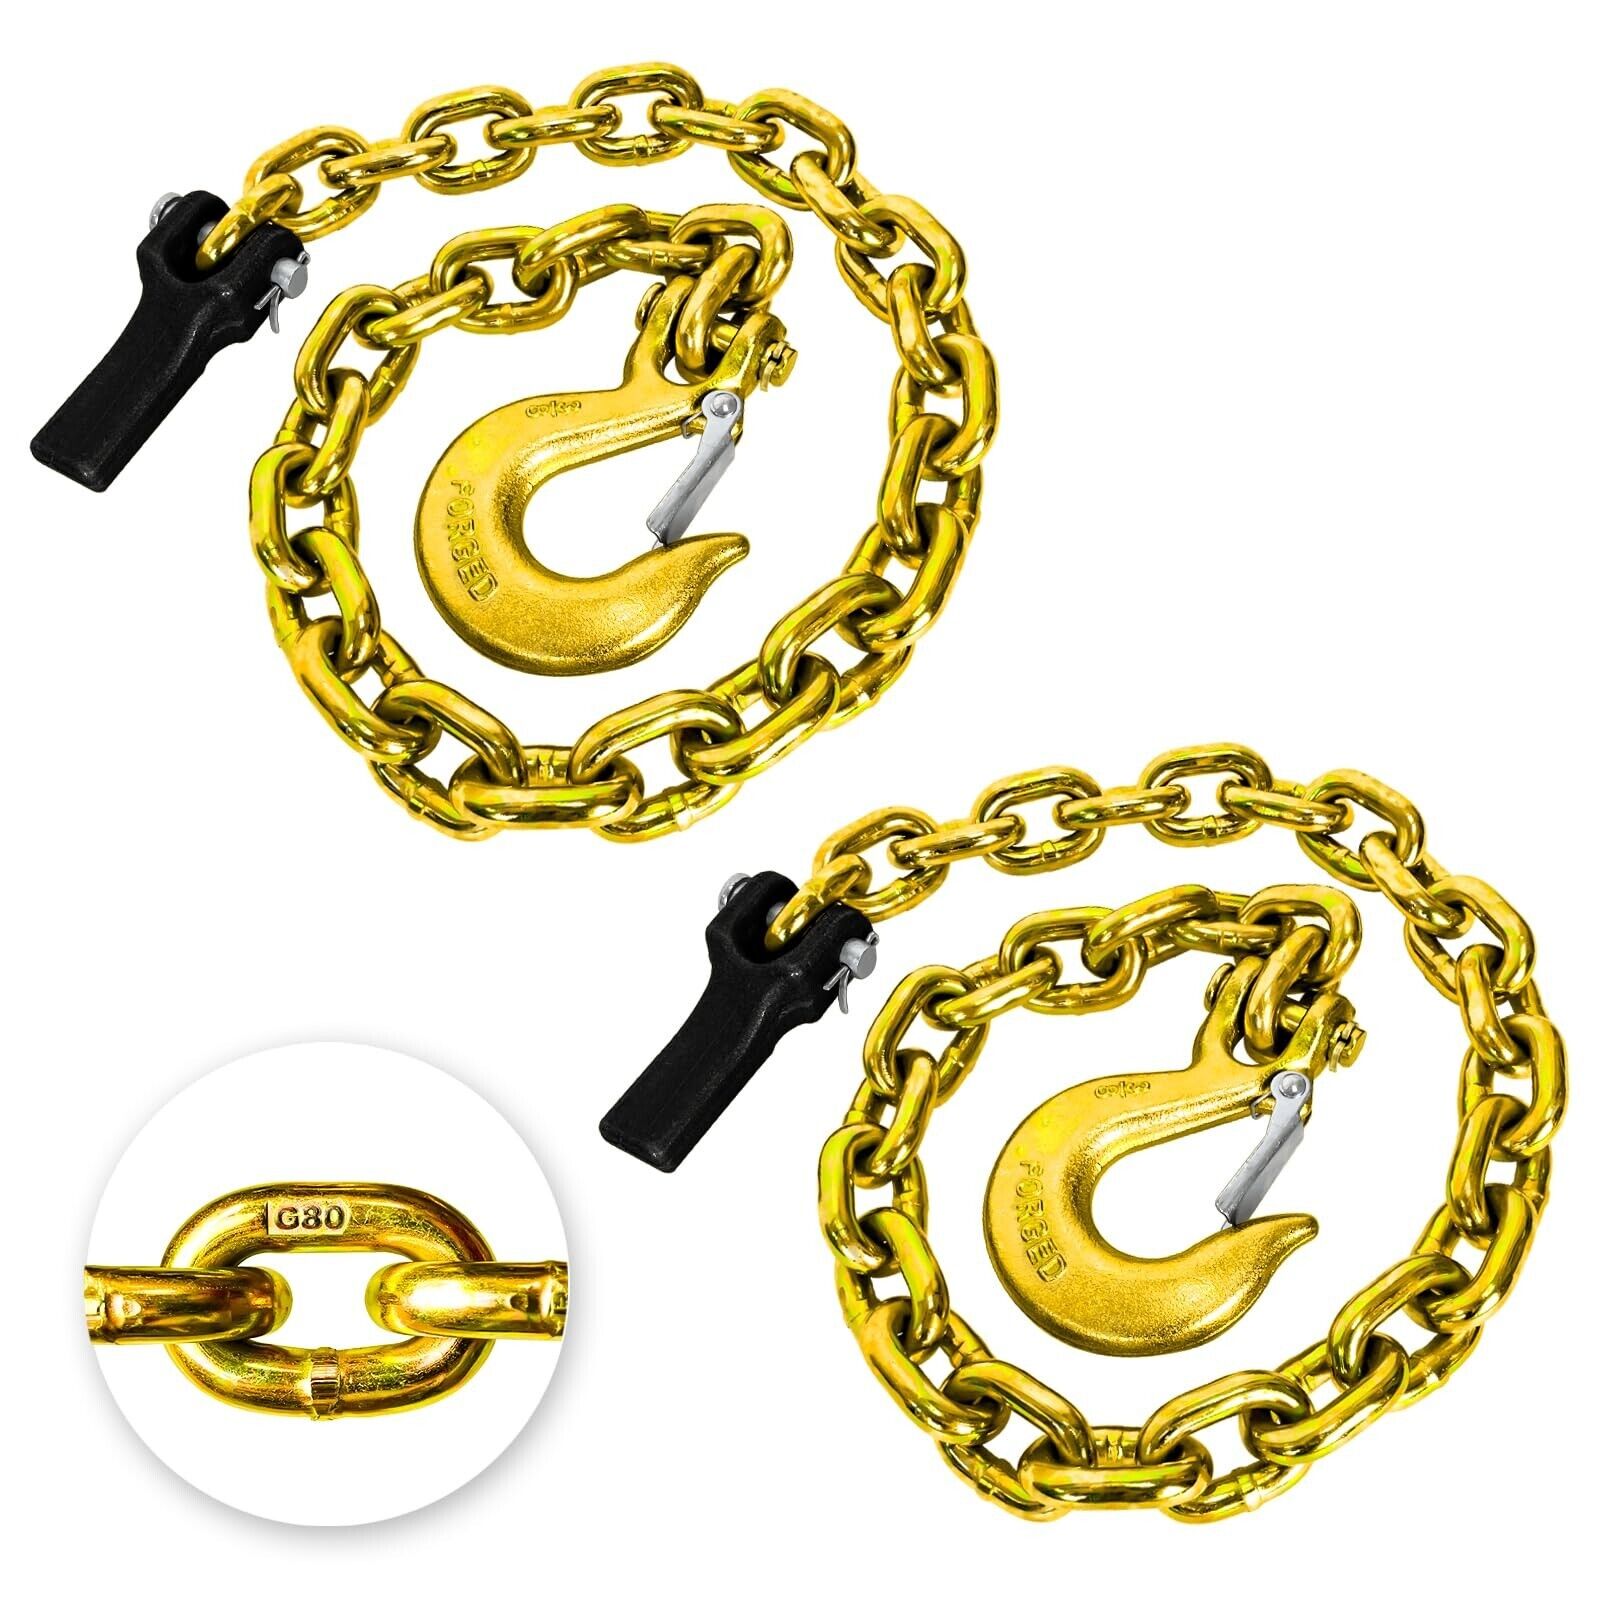 2-Pack Grade 80 Trailer Safety Chain 35 Inch with 3/8'' Clevis Snap Hook